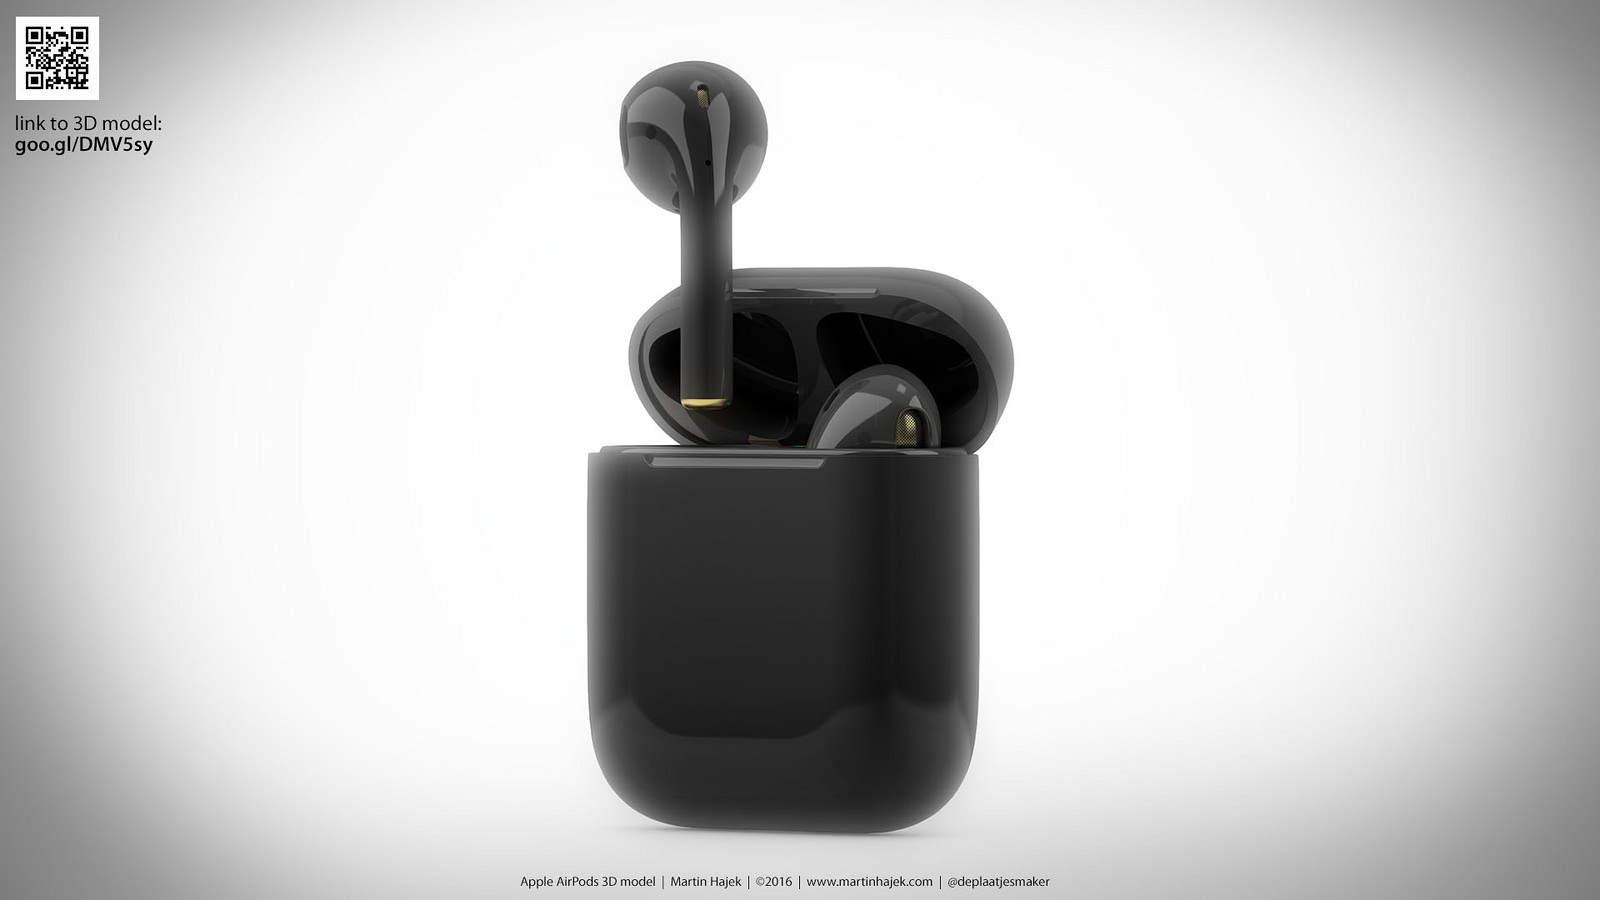 Apple should have made these black AirPods